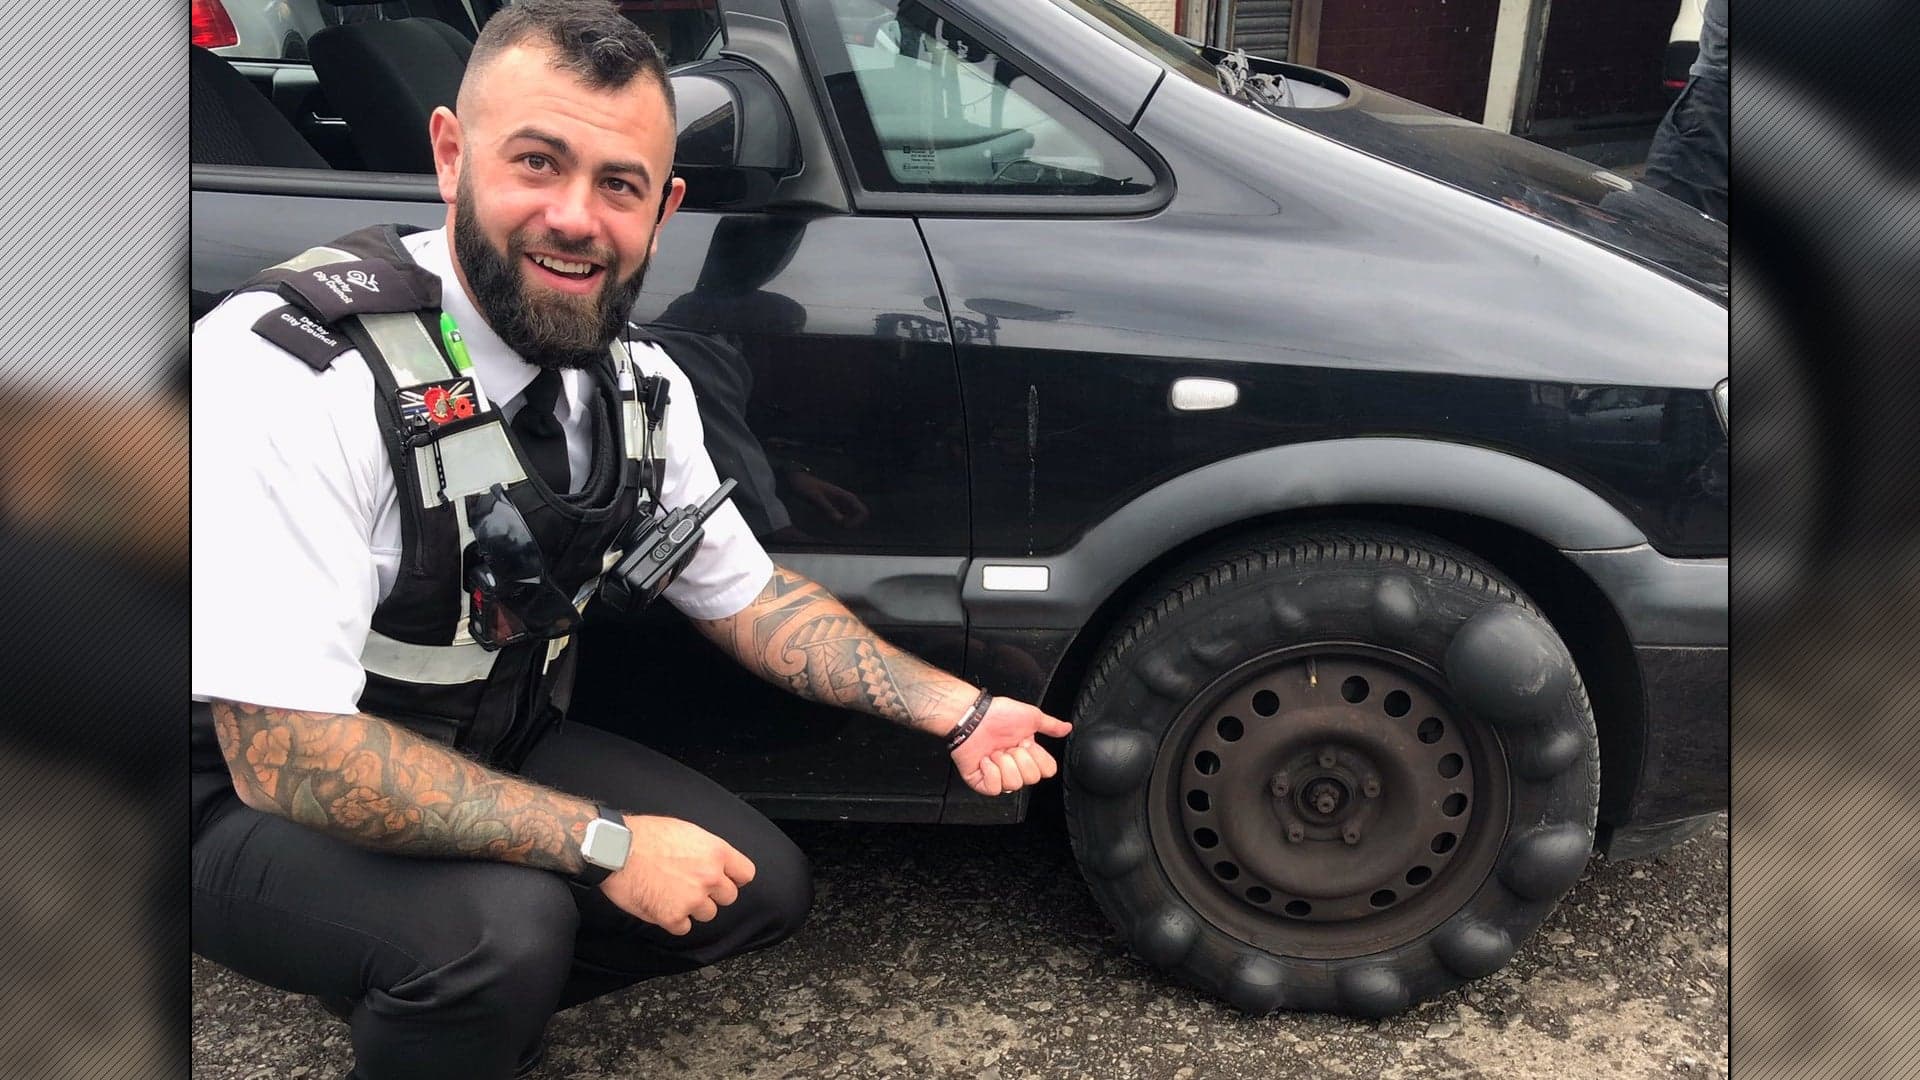 PSA: This Crazy Bubbled Tire Spotted By Police Is Massively Unsafe